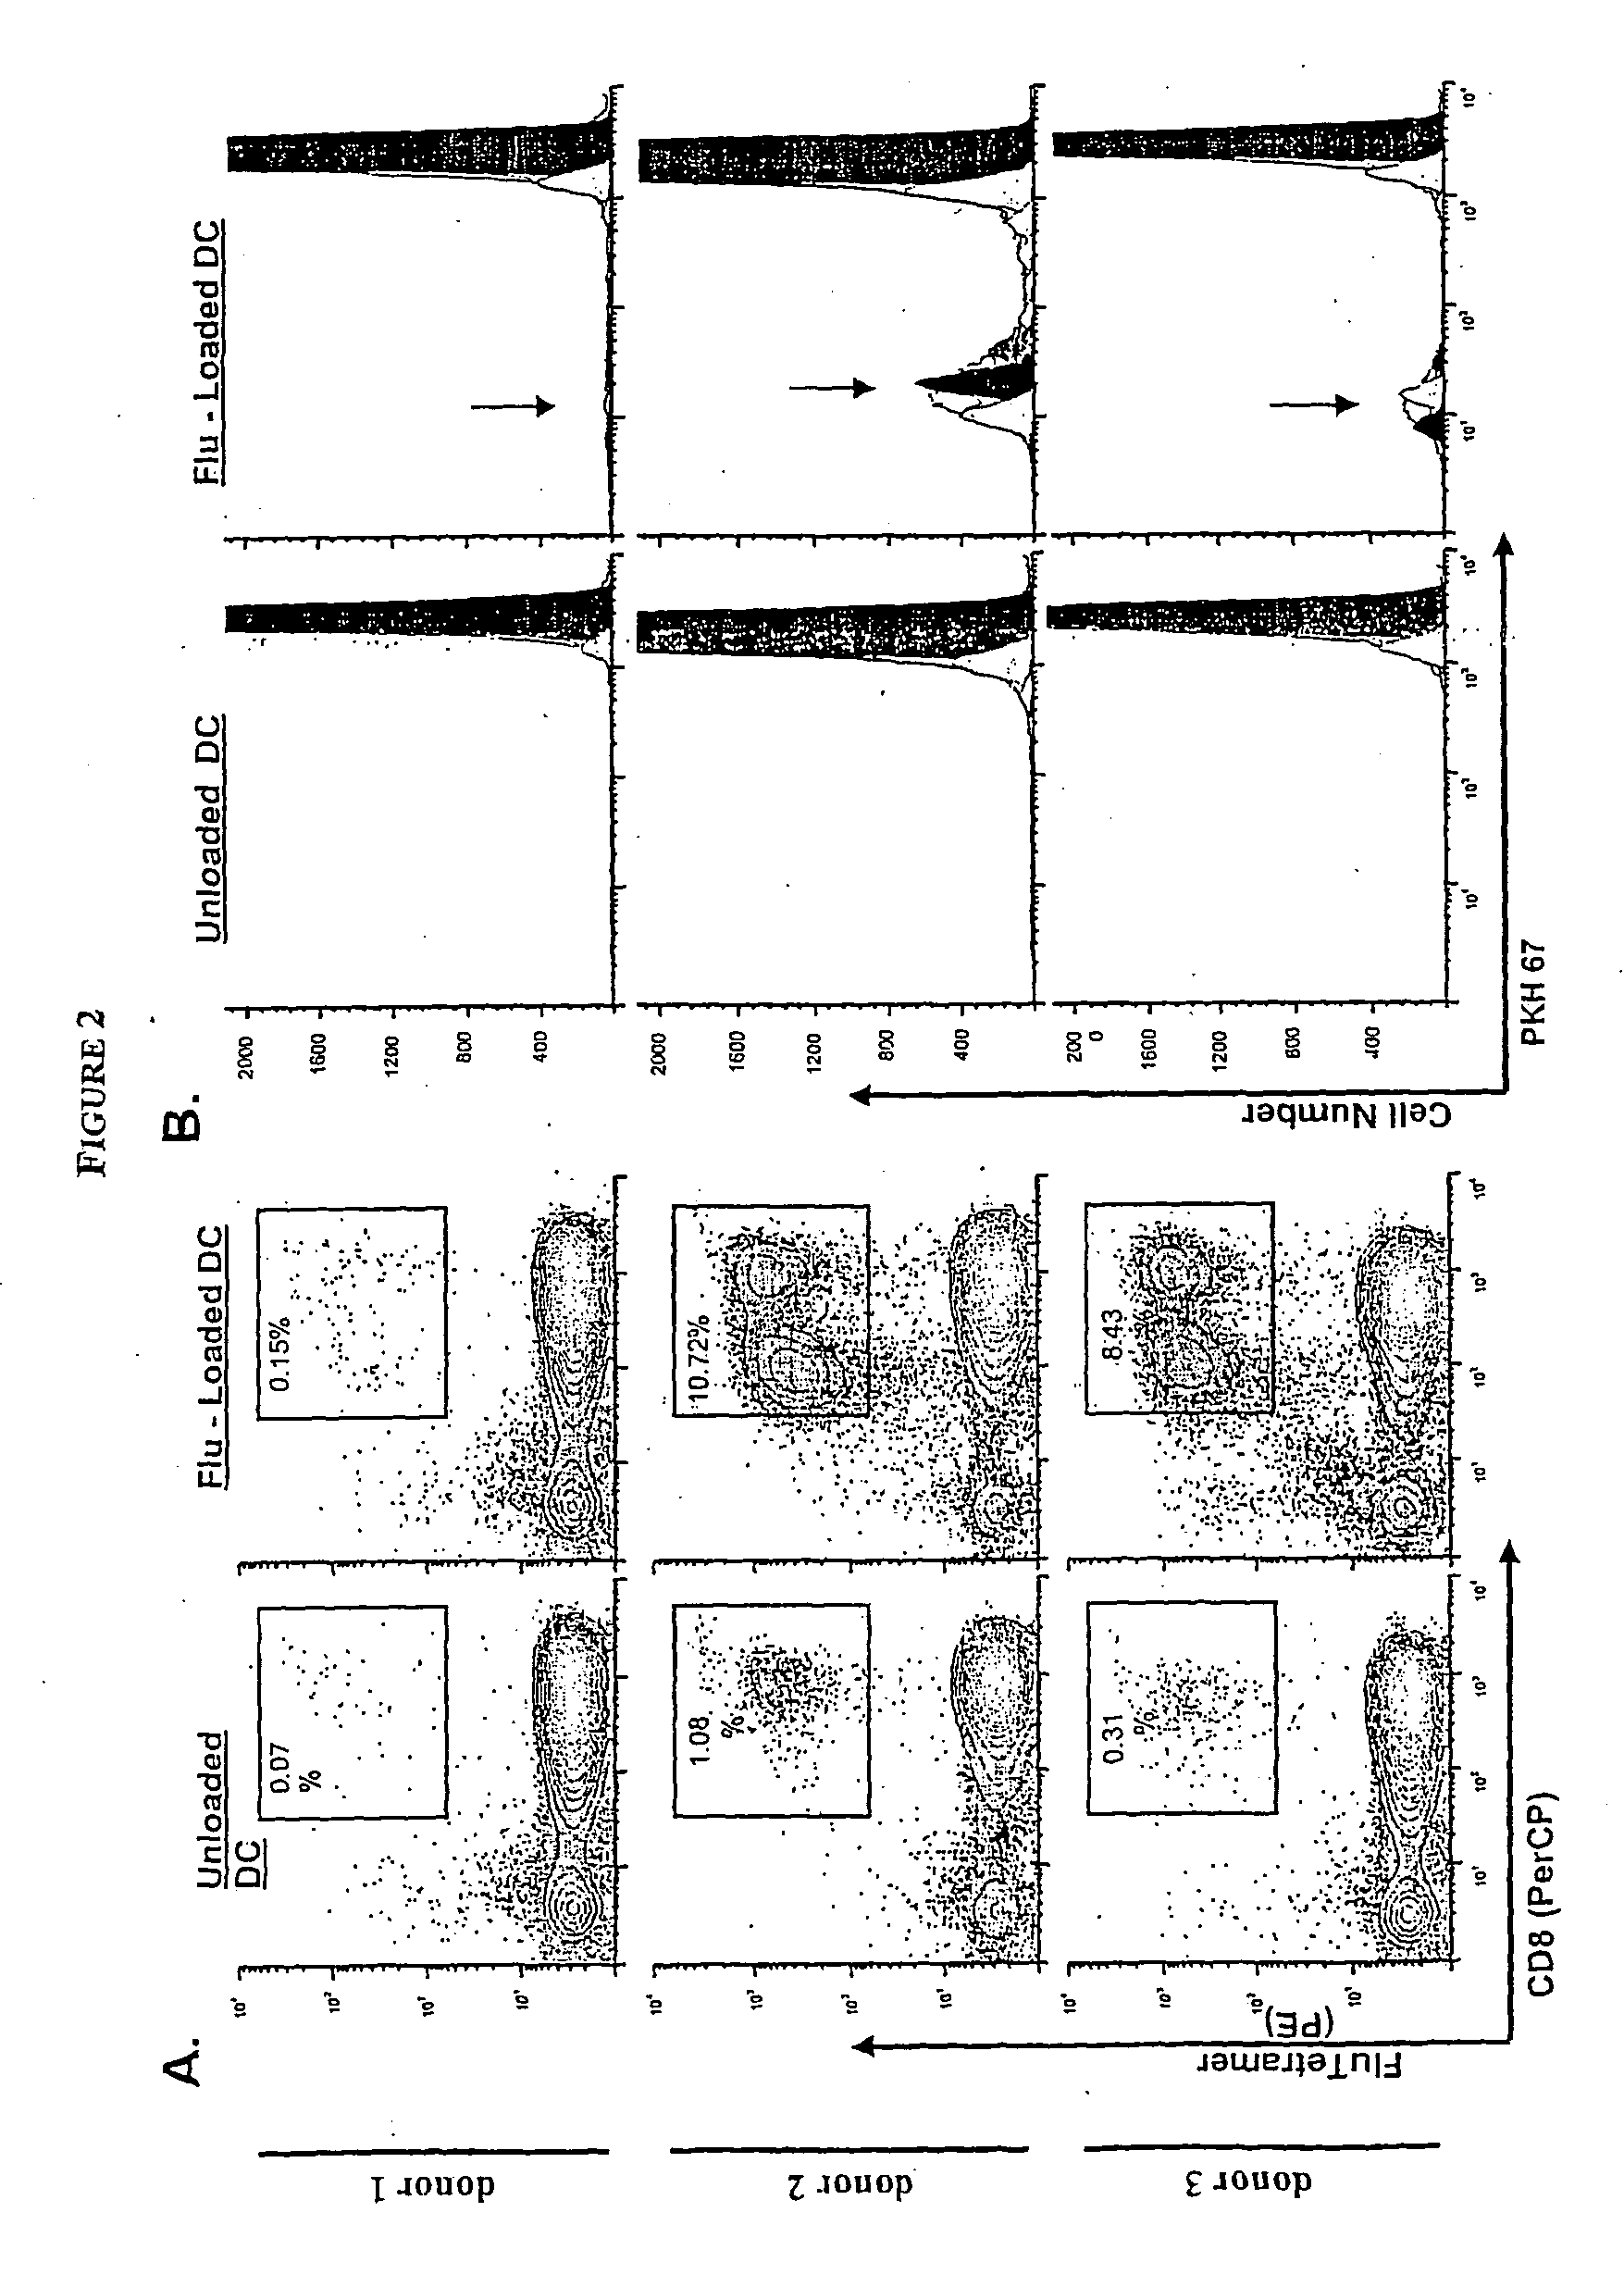 Method to measure a t cell response and its uses to qualify antigen-presenting cells